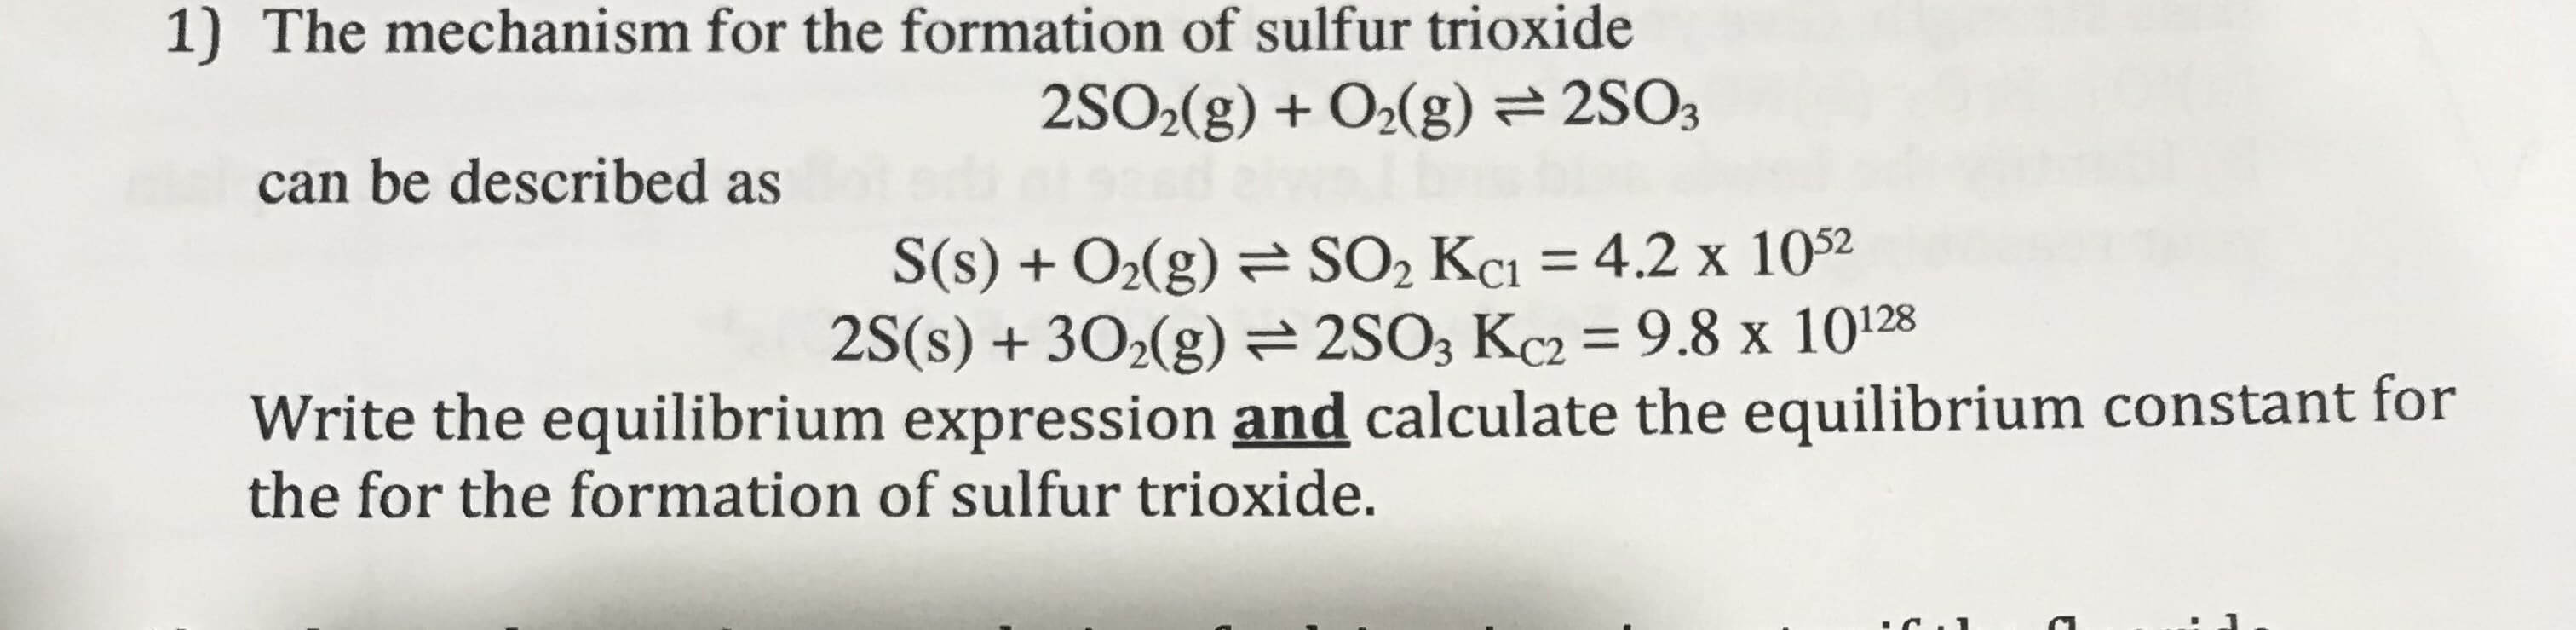 The mechanism for the formation of sulfur trioxide
2SO>(g) + O2(g) = 2SO3
can be described as
S(s) + O2(g) = SO, Kci = 4.2 x 1052
2S(s) + 302(g)= 2SO3 Kc2 = 9.8 x 10128
Write the equilibrium expression and calculate the equilibrium constant for
the for the formation of sulfur trioxide.
